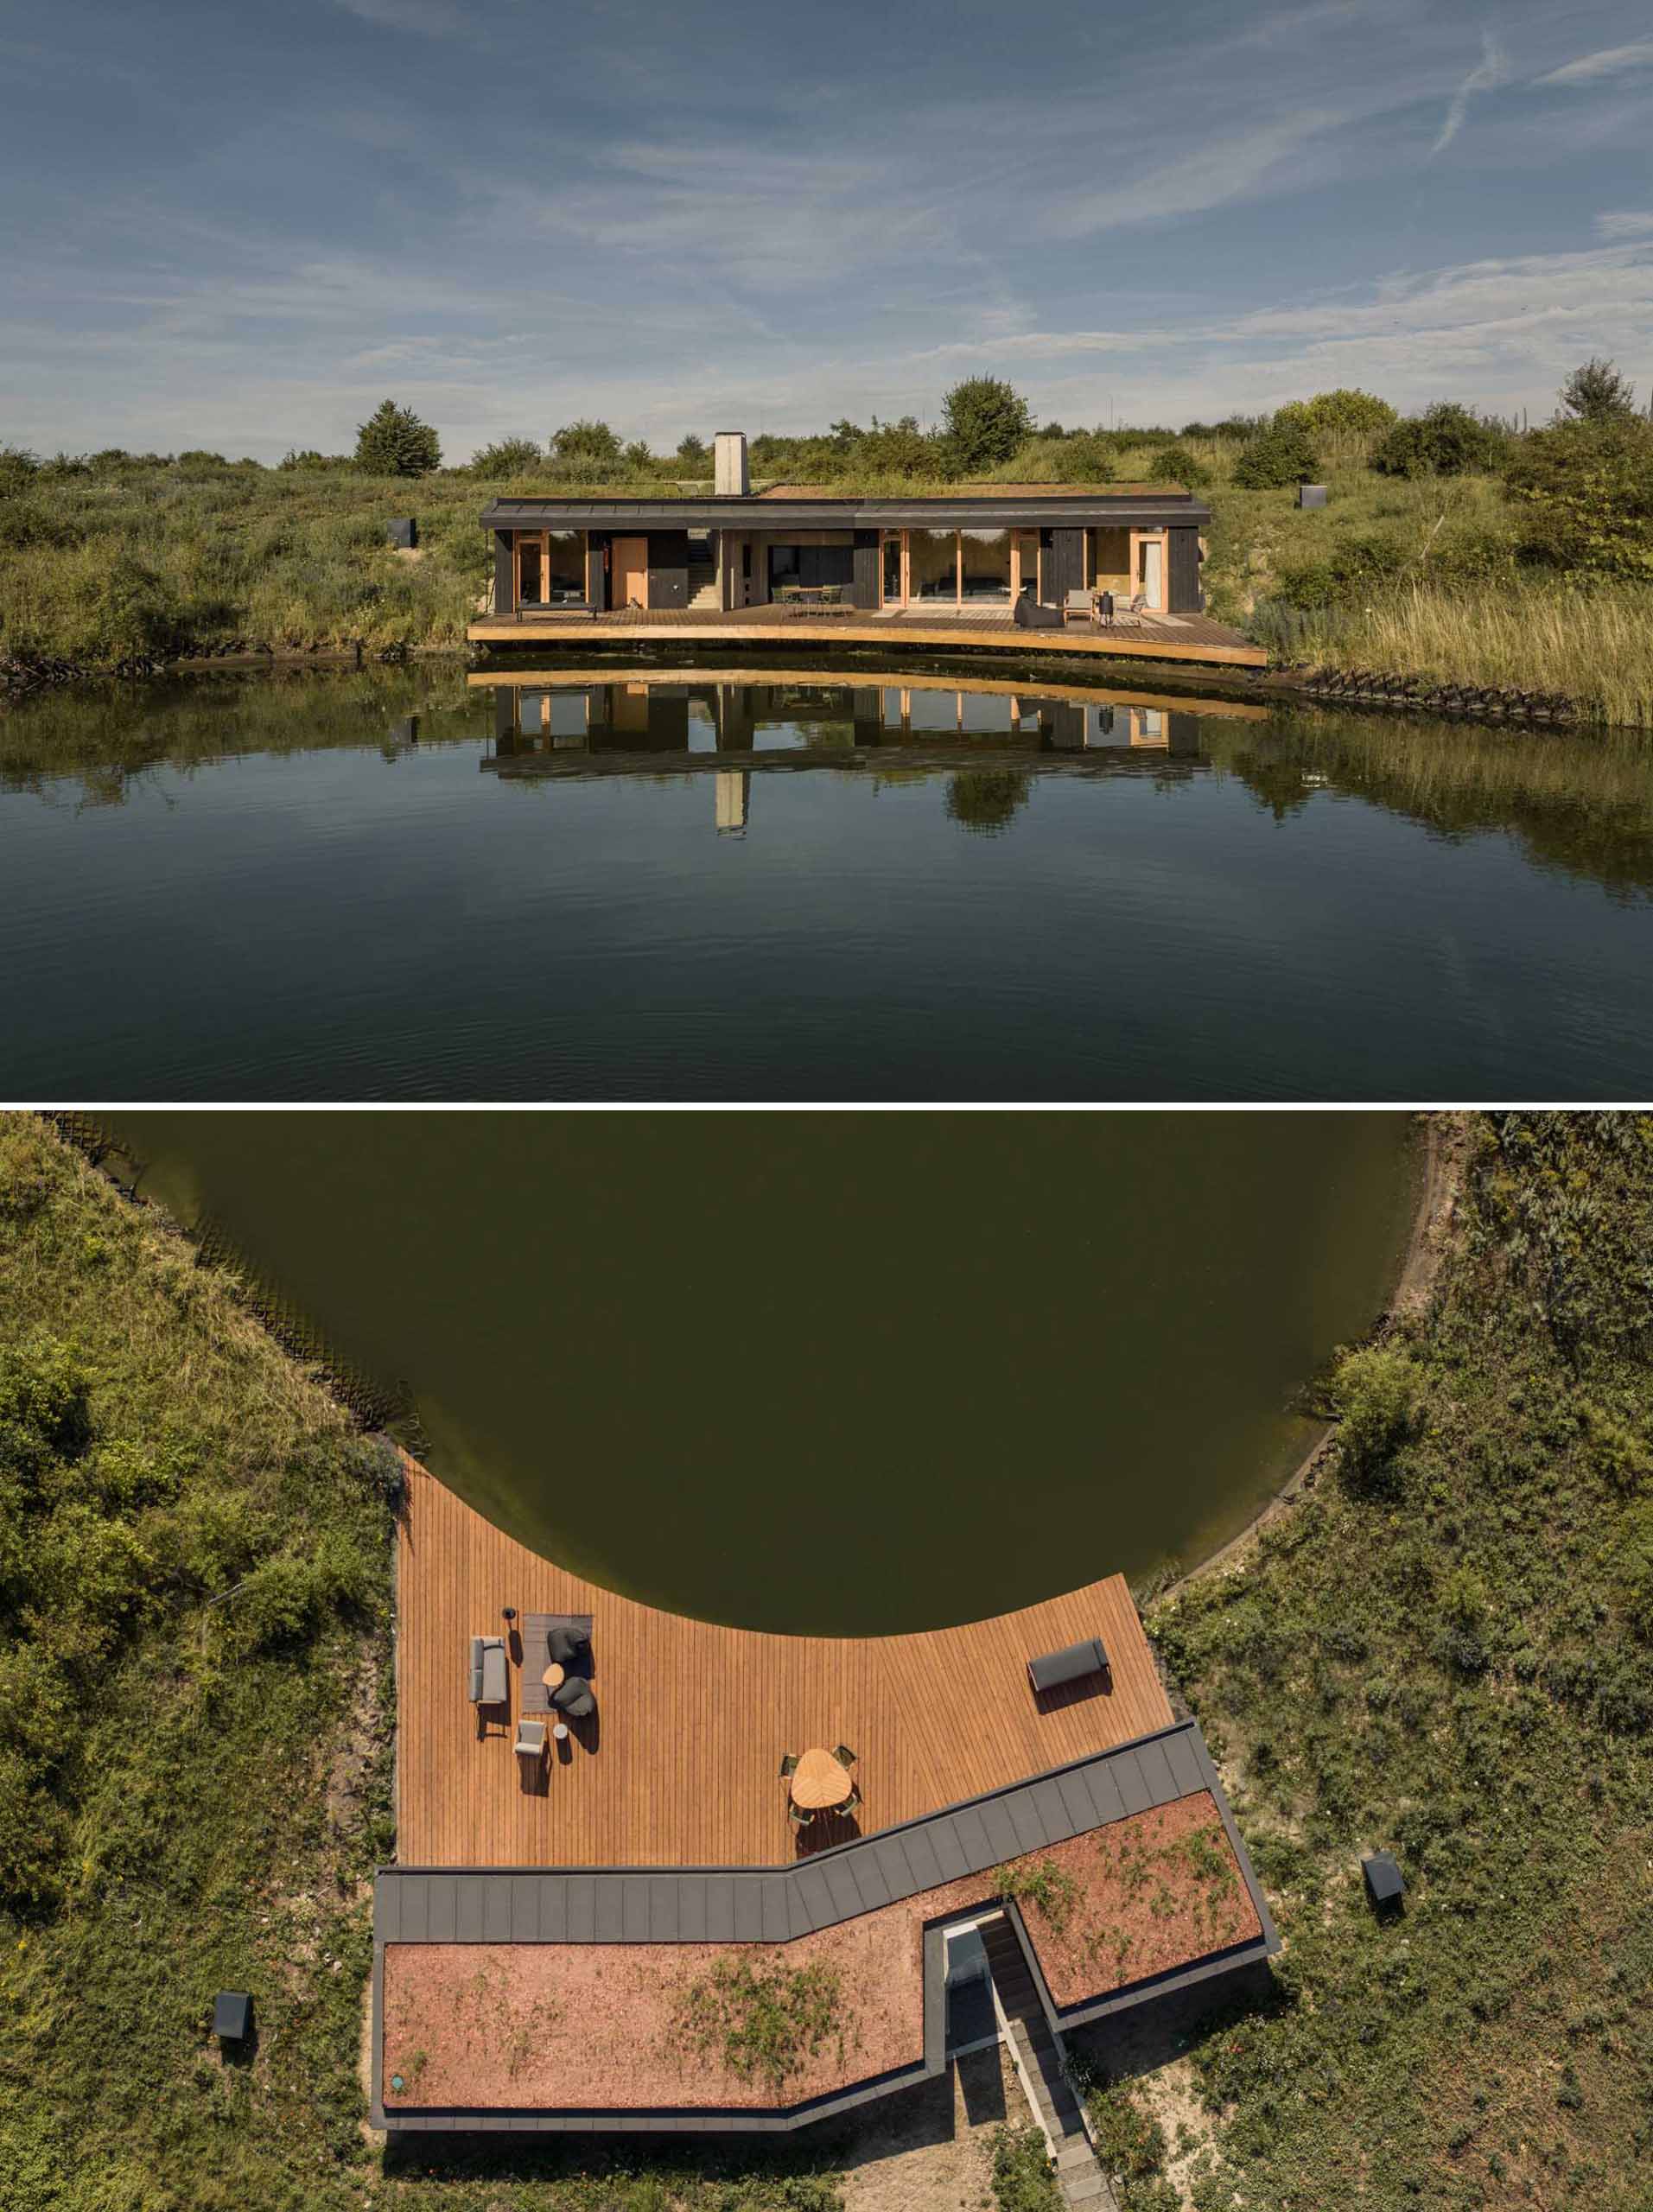 Situated next to a fishing pond, this small home acts as a retreat for the owners and is dug into a mound, peeking out just enough to blend with the horizon.